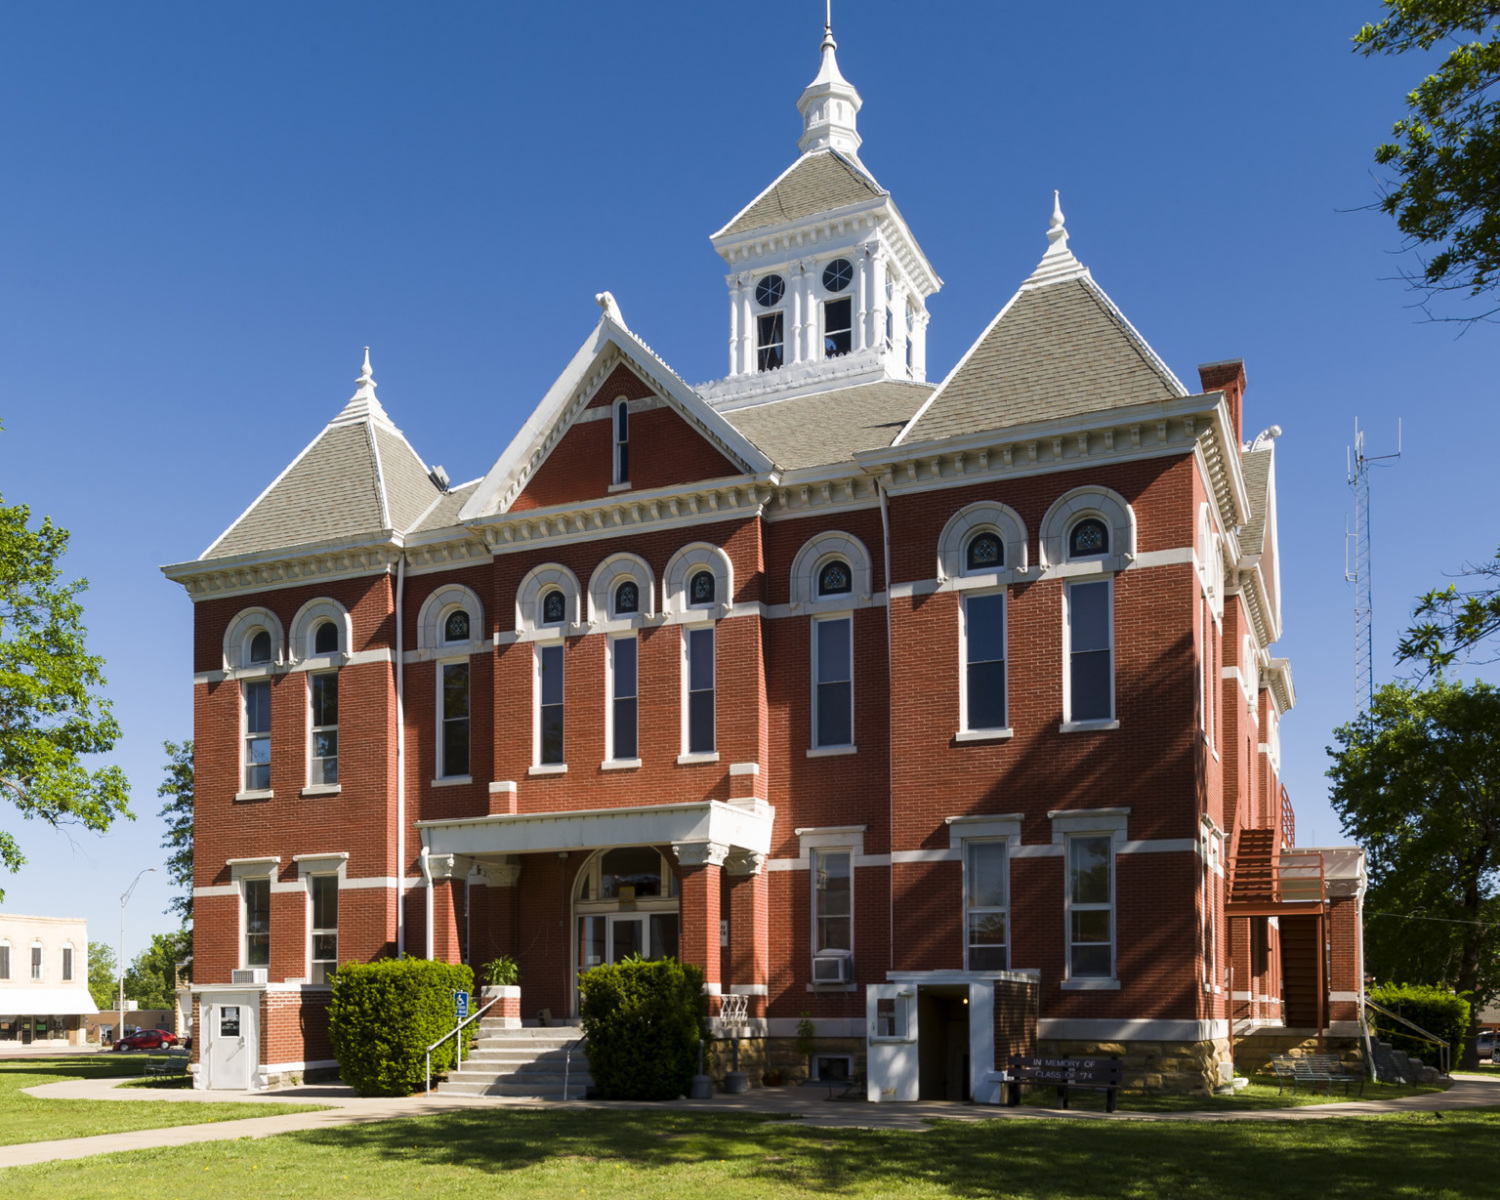 An image of the Woodson County Courthouse in Yates Center, Kansas.  Designed by George P. Washburn, the Yates Center courthouse was completed in 1900.  The brick Woodson County Courthouse, a Romanesque Revival structure, is listed on the National Register of Historic Places.  This image © Capitolshots Photography/TwoFiftyFour Photos, LLC, ALL RIGHTS RESERVED.